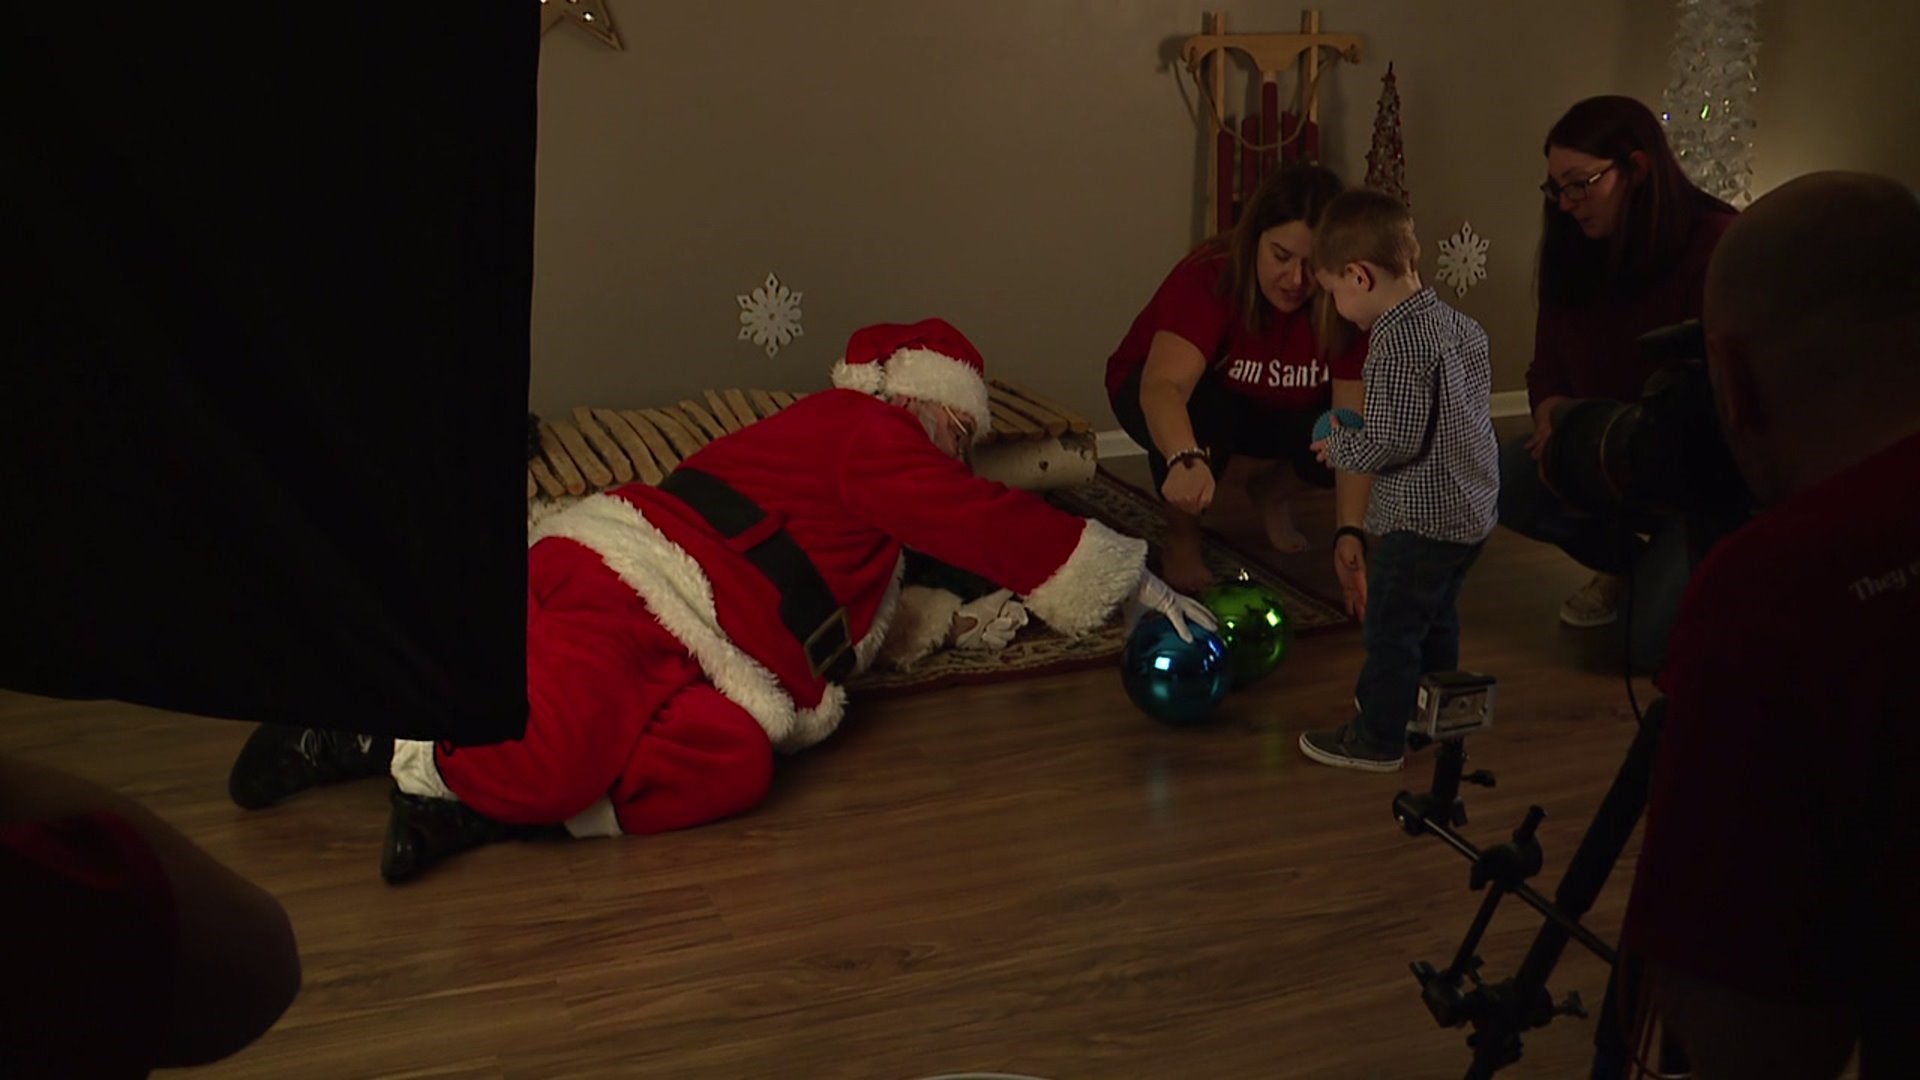 Santa Event Specially Designed for Kids with Special Needs